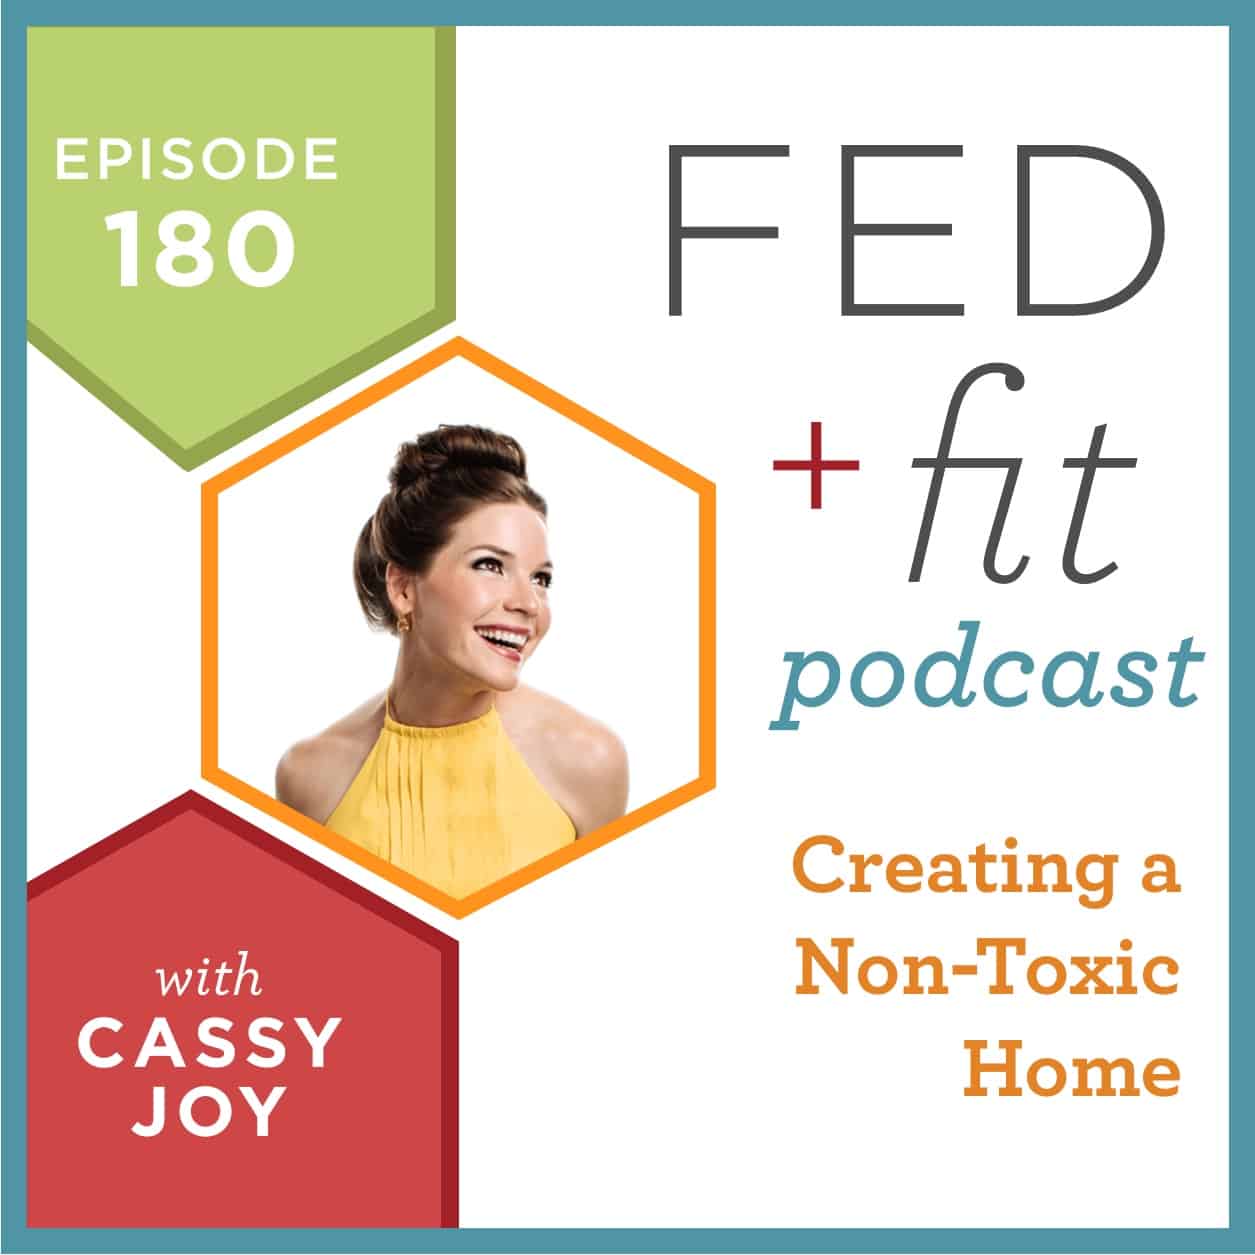 Fed and Fit podcast graphic, episode 180 Creating a Non-Toxic Home with Cassy Joy